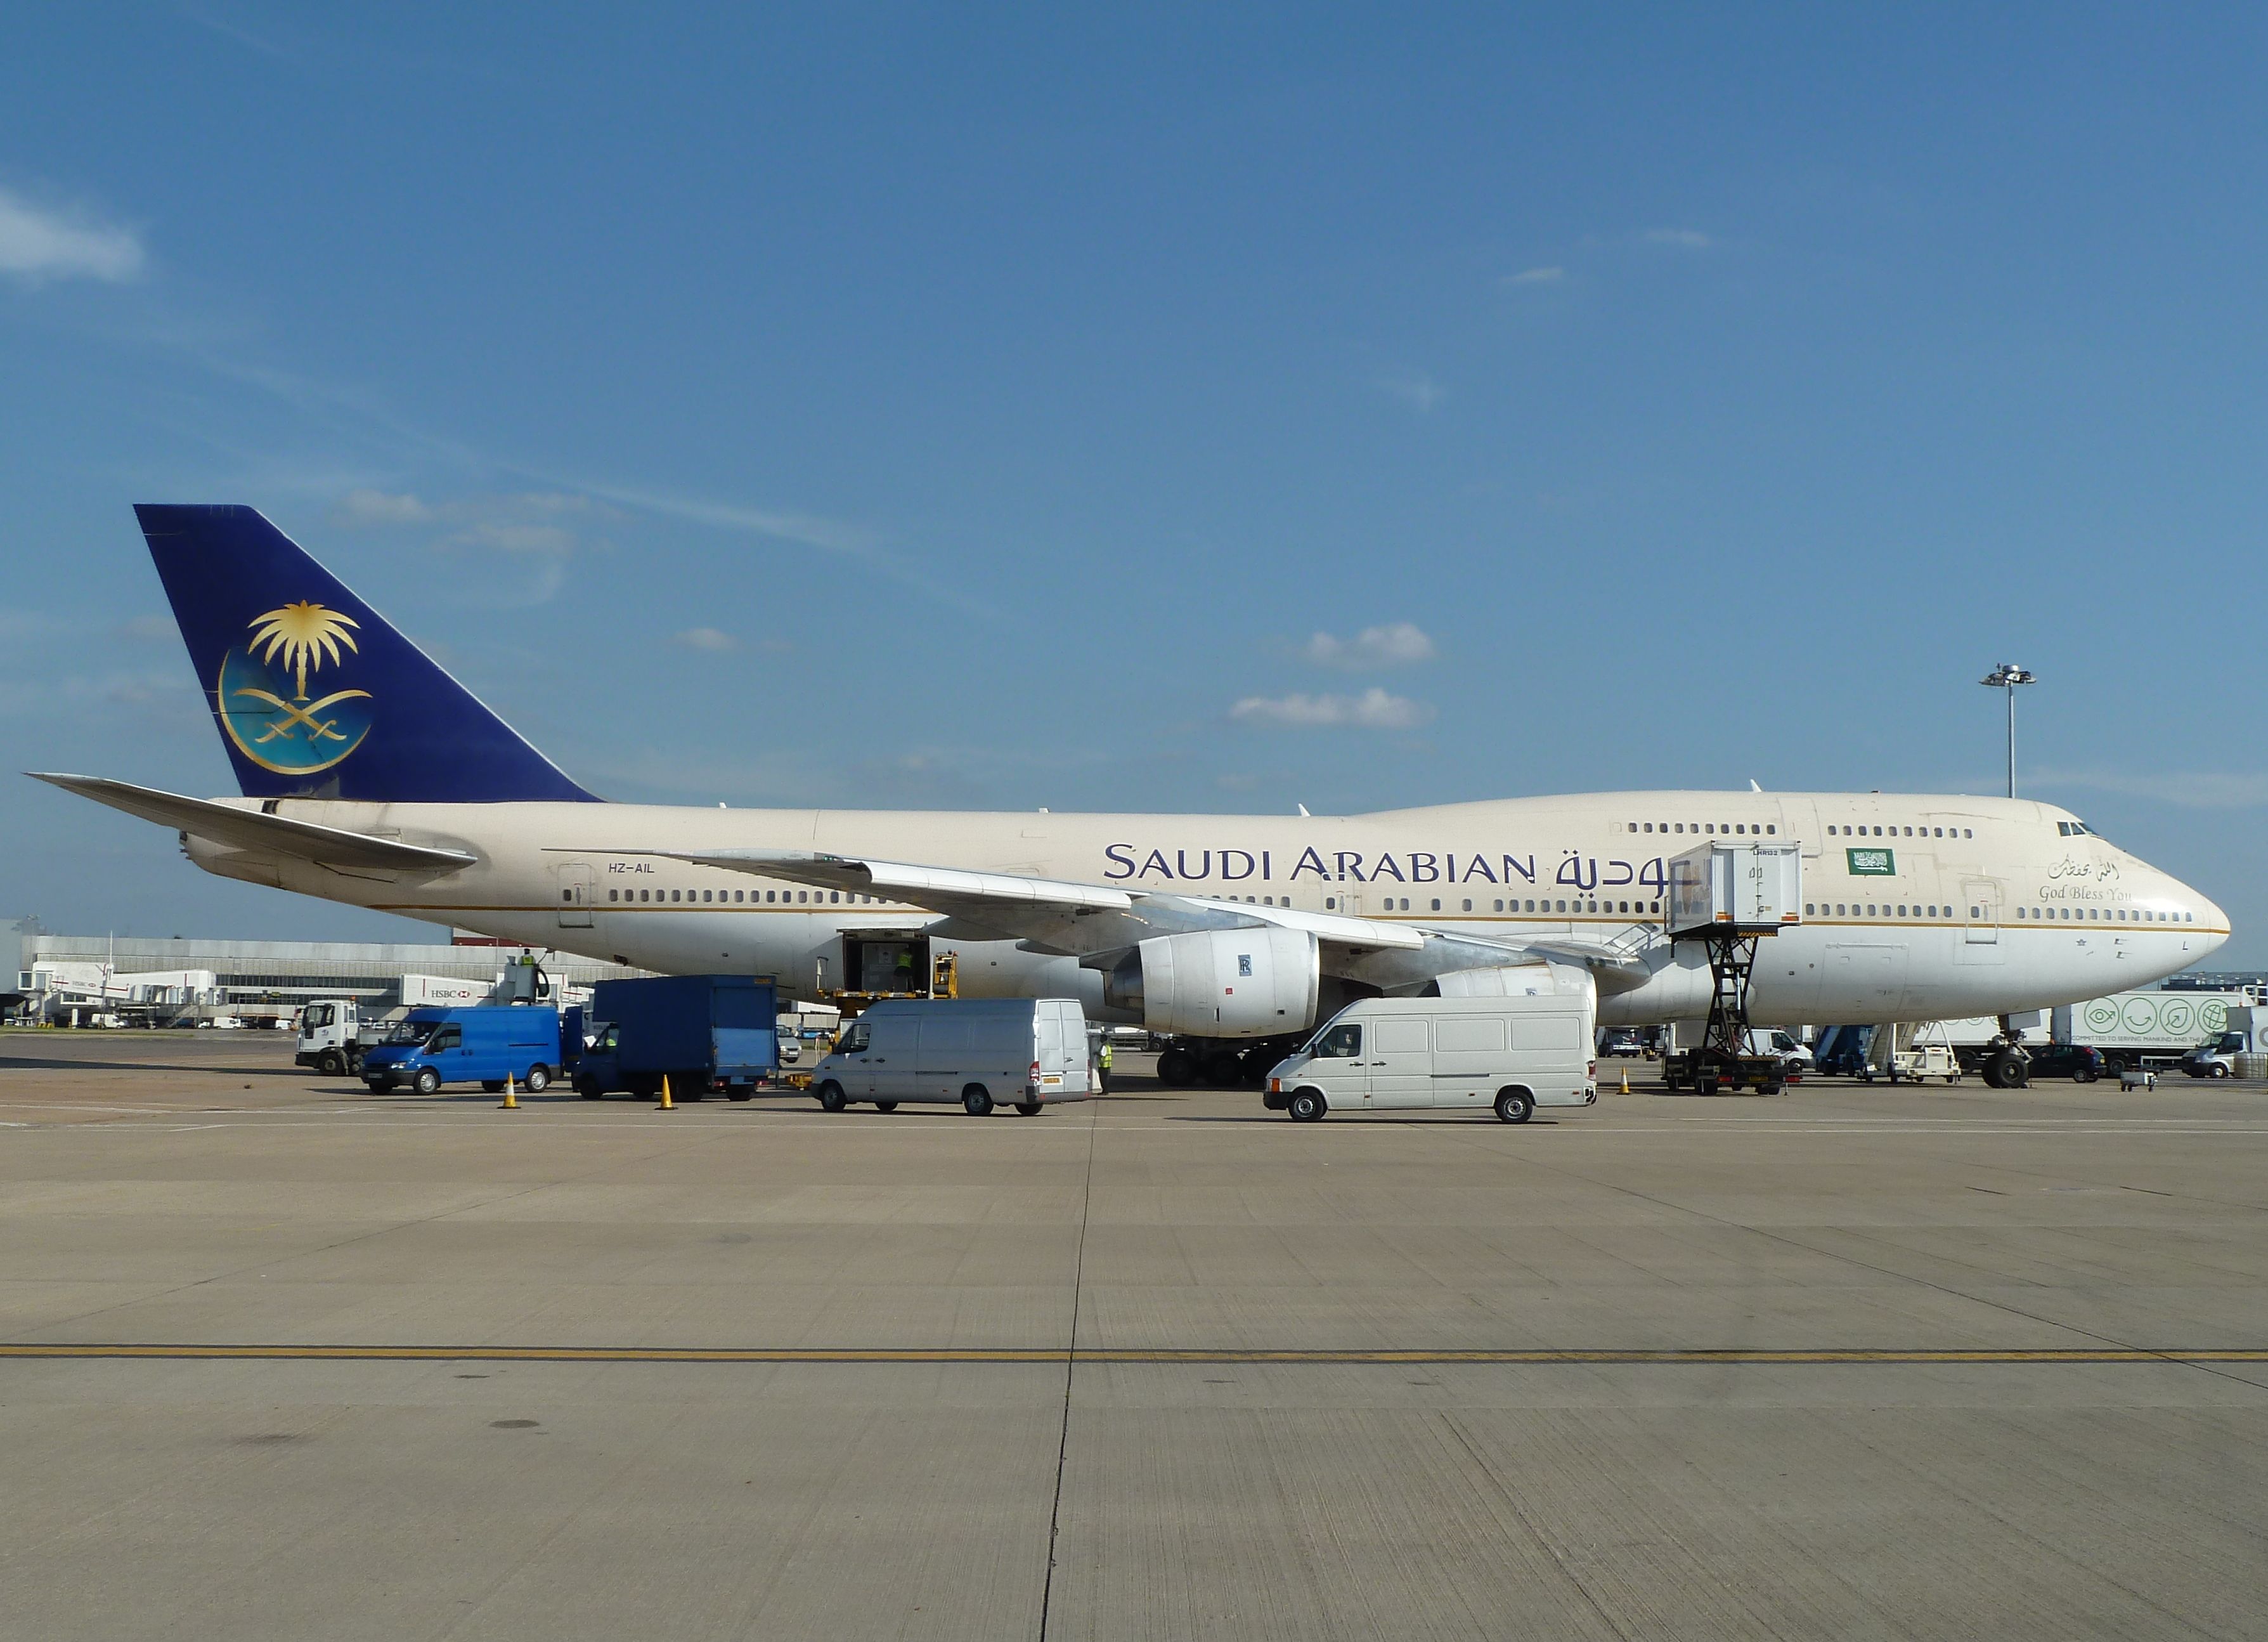 A Saudia Boeing 747-300 on an airport apron.